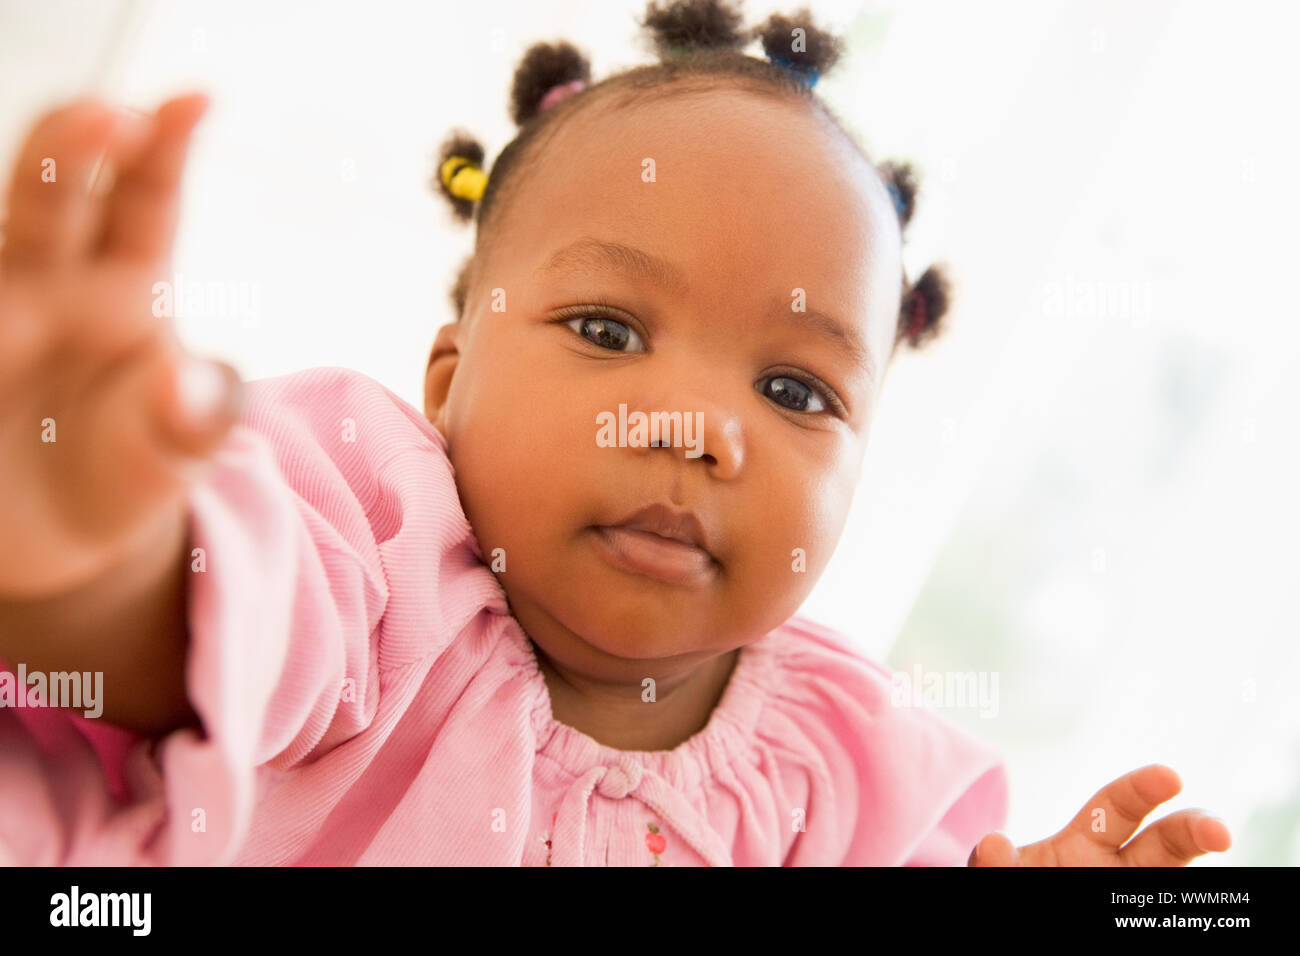 Baby indoors reaching hand out Stock Photo